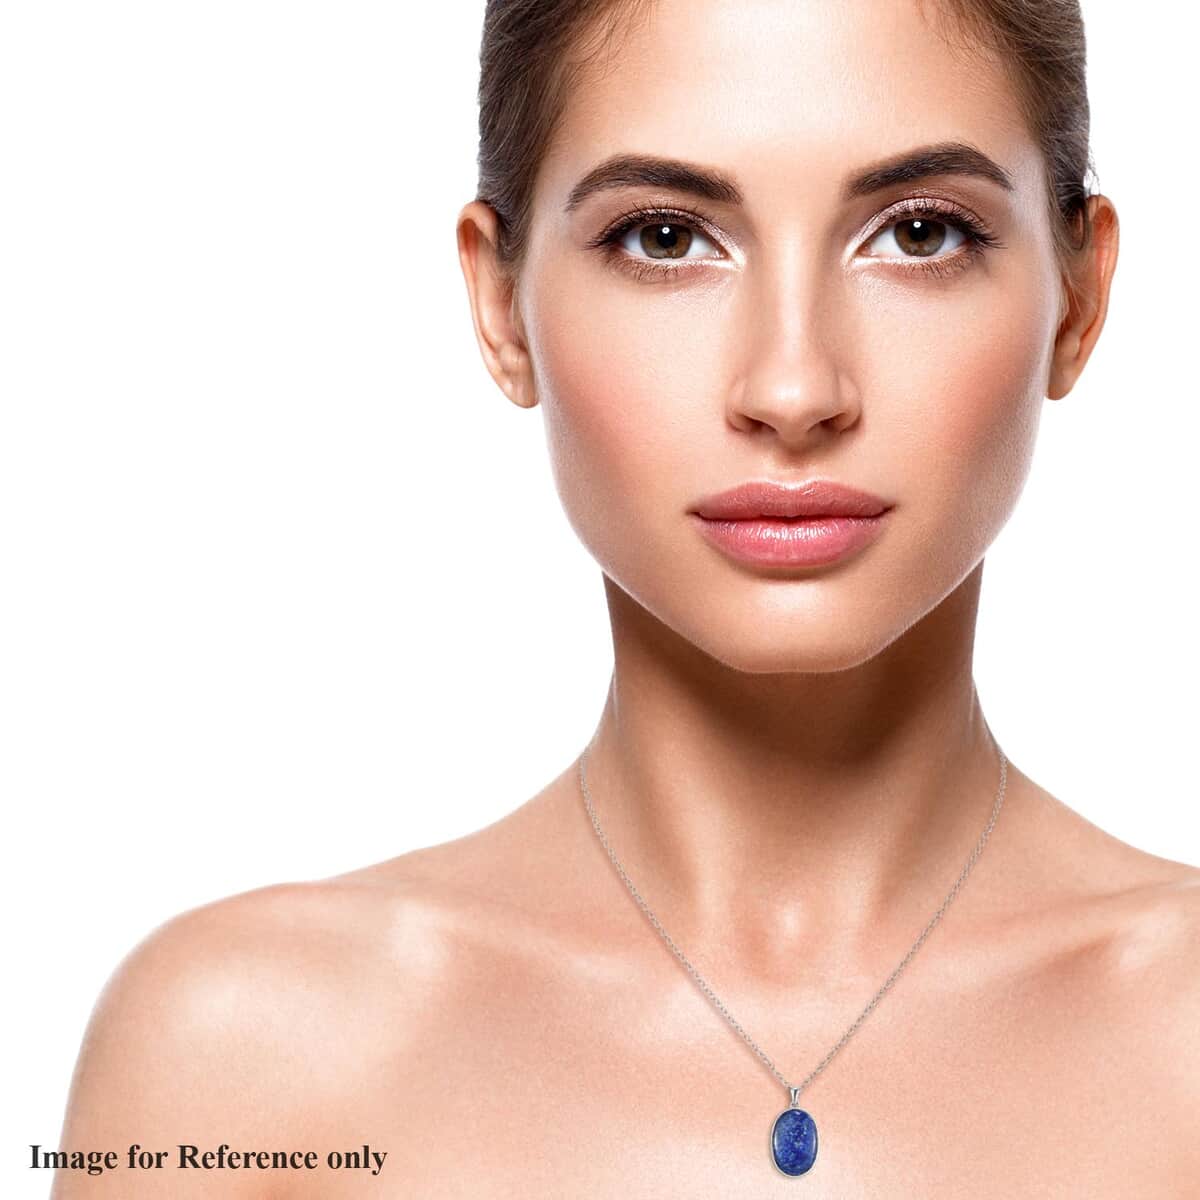 Lapis Lazuli (Ovl 30x20 mm) Pendant Necklace (24 Inches) in 14K YG & Platinum Over Copper with Magnet and Stainless Steel 32.00 ctw | Tarnish-Free, Waterproof, Sweat Proof Jewelry image number 2